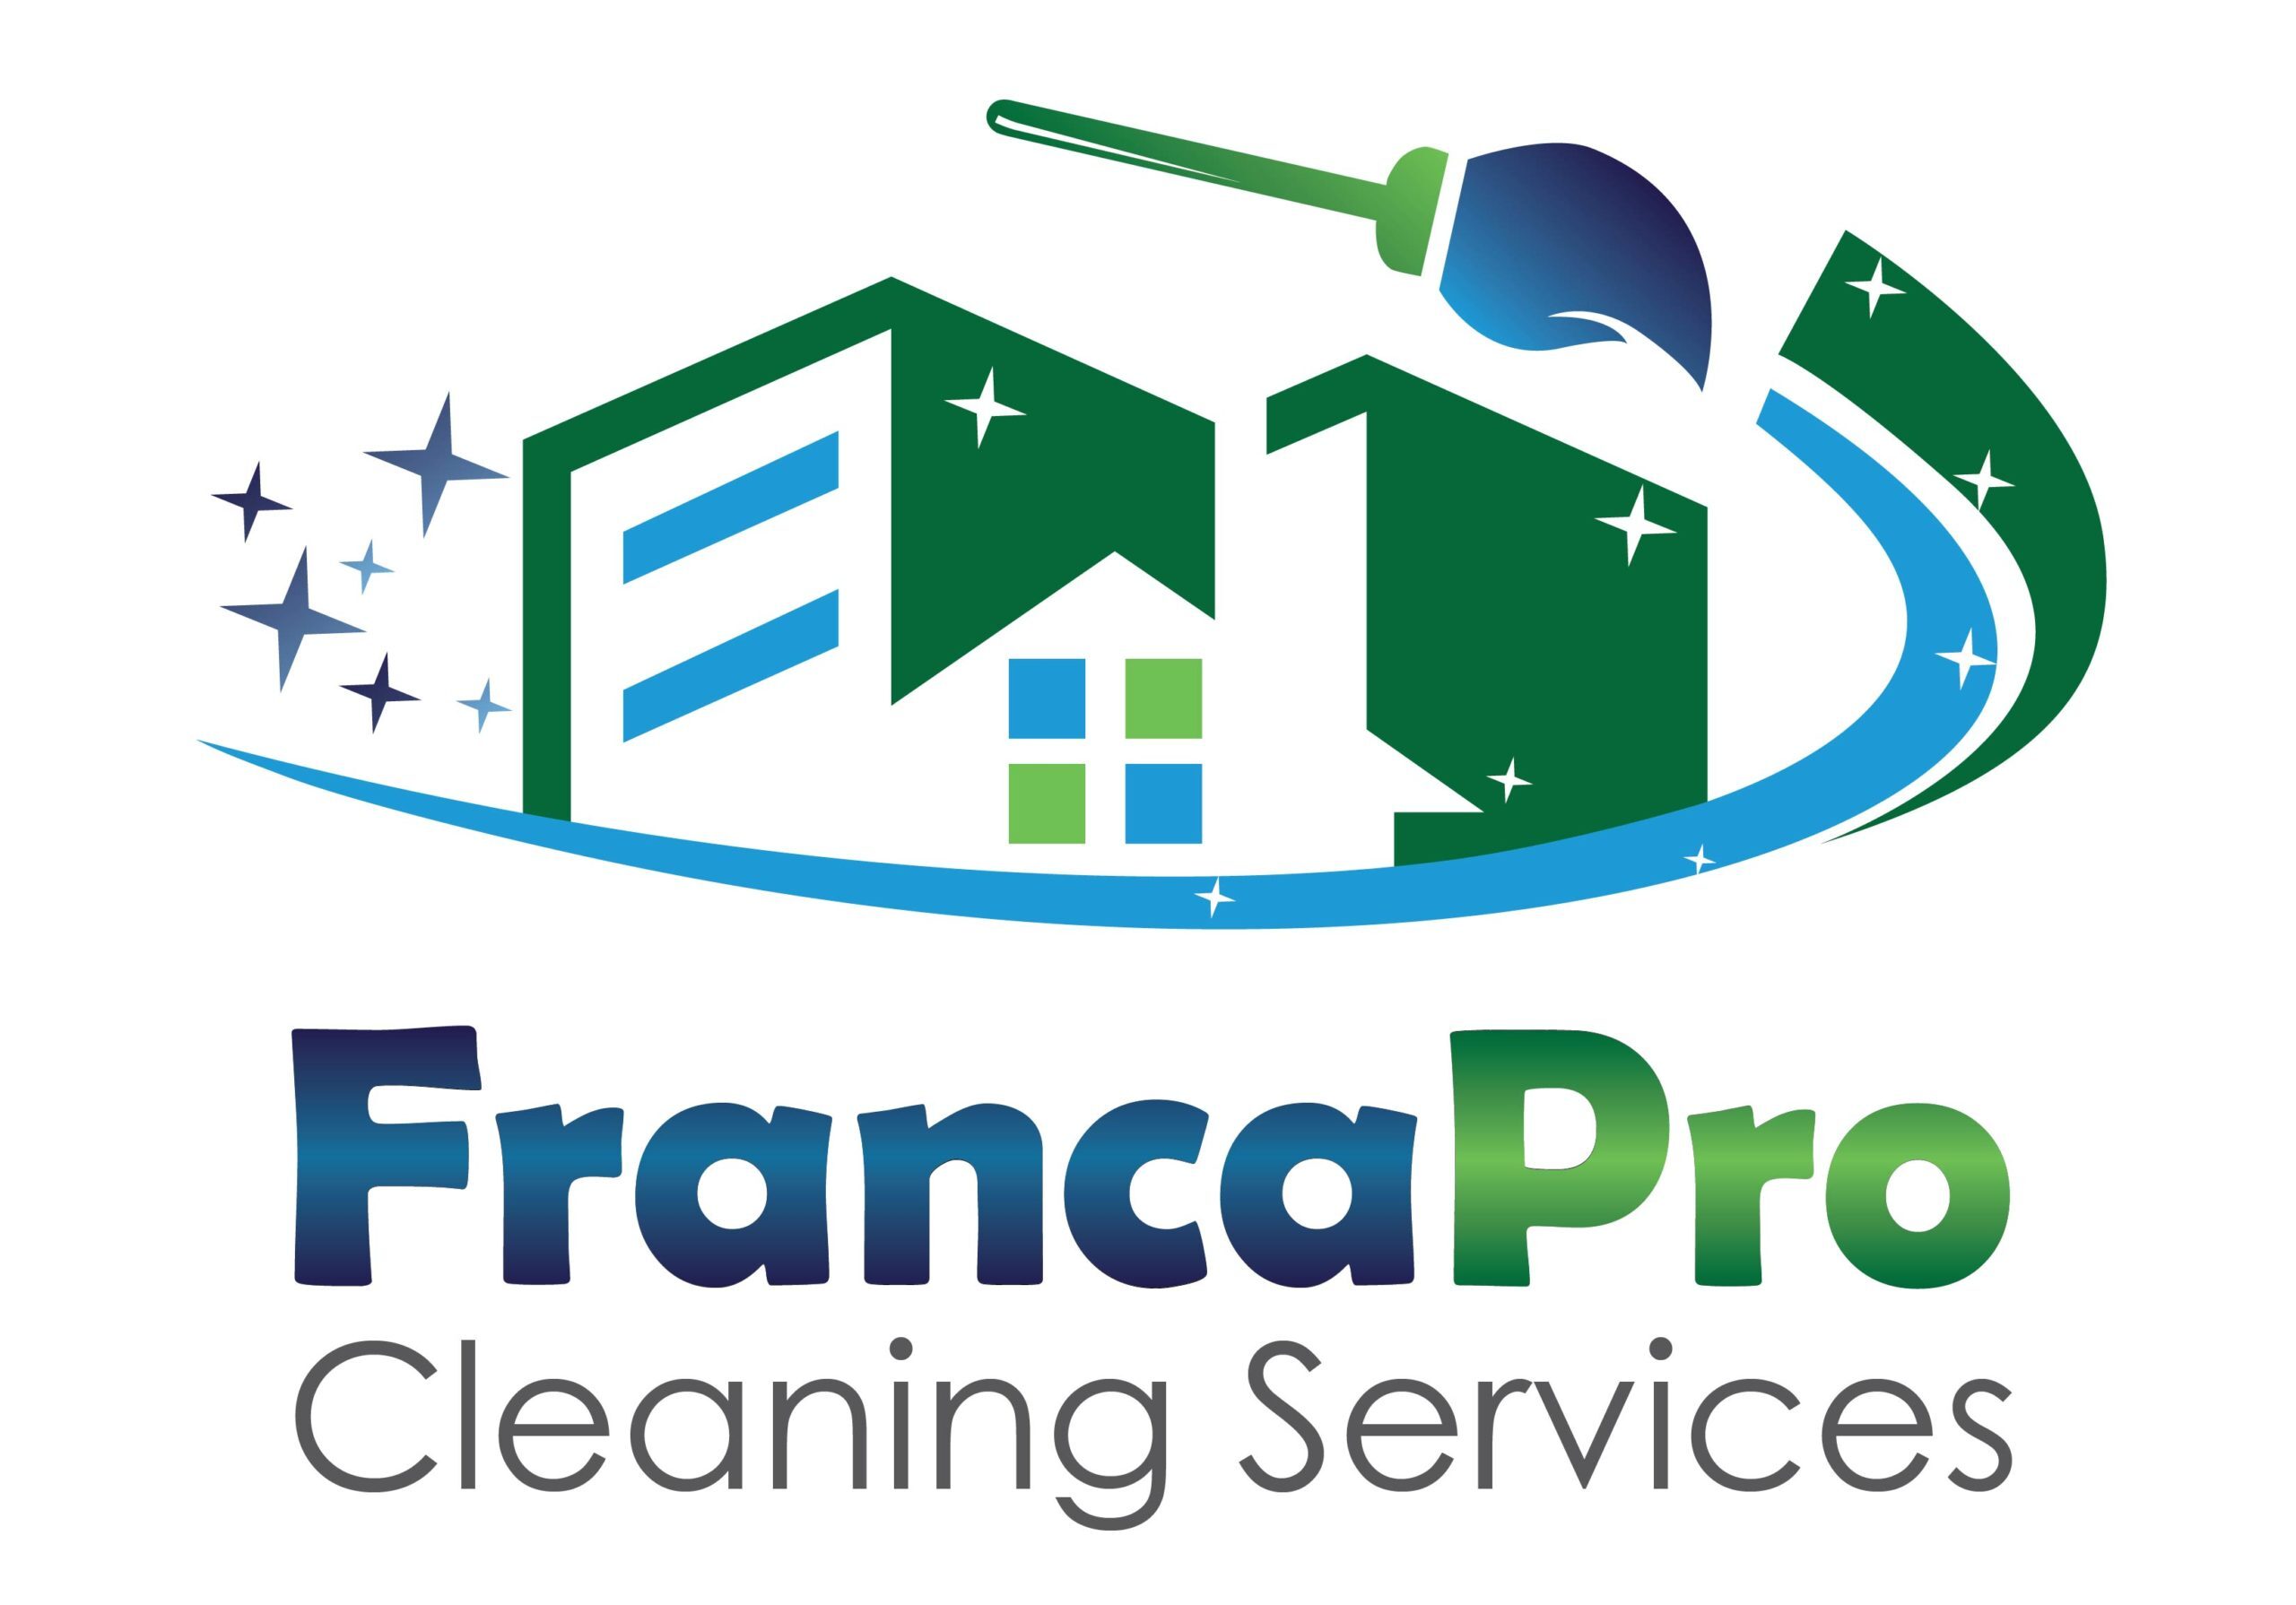 Franca Pro Cleaning Services